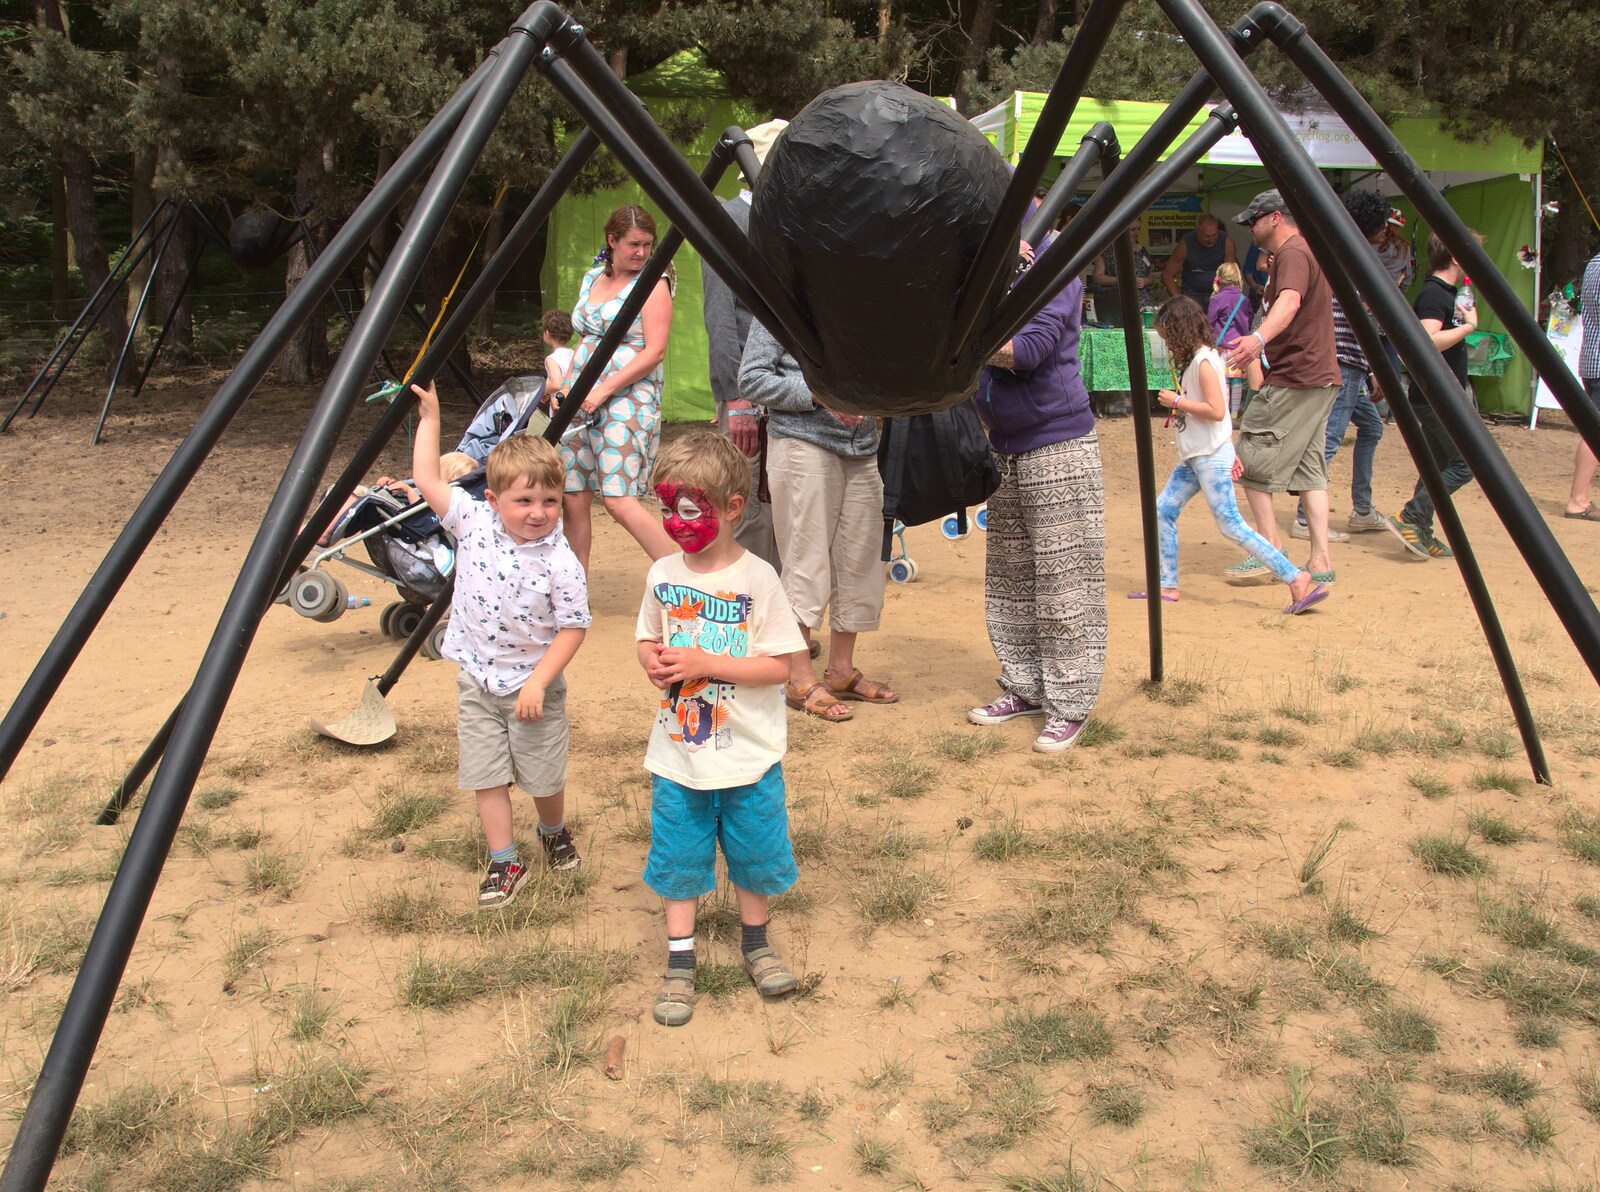 Fred under a giant spider from The 8th Latitude Festival, Henham Park, Southwold, Suffolk - 18th July 2013